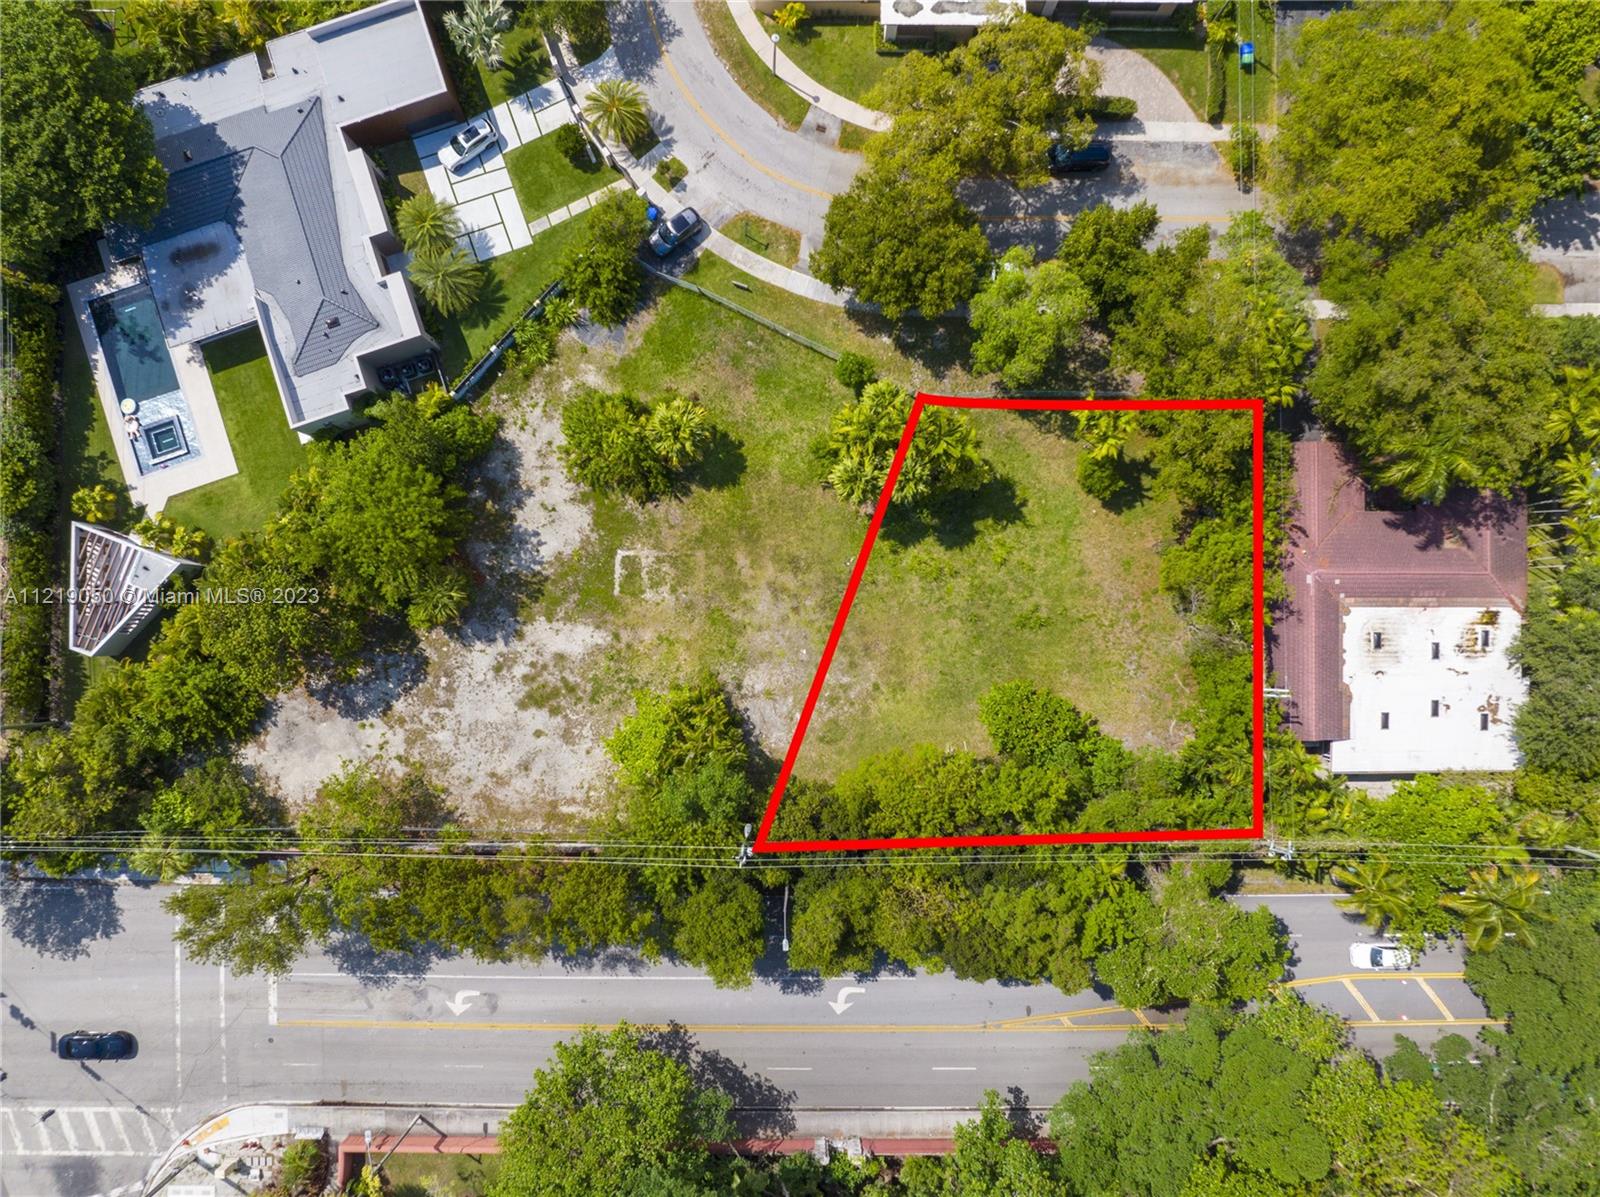 Unique opportunity to purchase this individual large 12,675 SF lot for $1.95M and build your dream home in prestigious and 24 hour policed patrolled Bay Heights! This is a great community with no thru traffic, in a NO FLOOD ZONE!  It is walking distance to Viscaya, Kennedy Park, the Bay and Ransom Everglades Middle School. 
Or purchase two lots side by side for a combined square footage of 30,574, asking $4.7M!  
We can put you in touch with lenders and construction companies to customise your home.